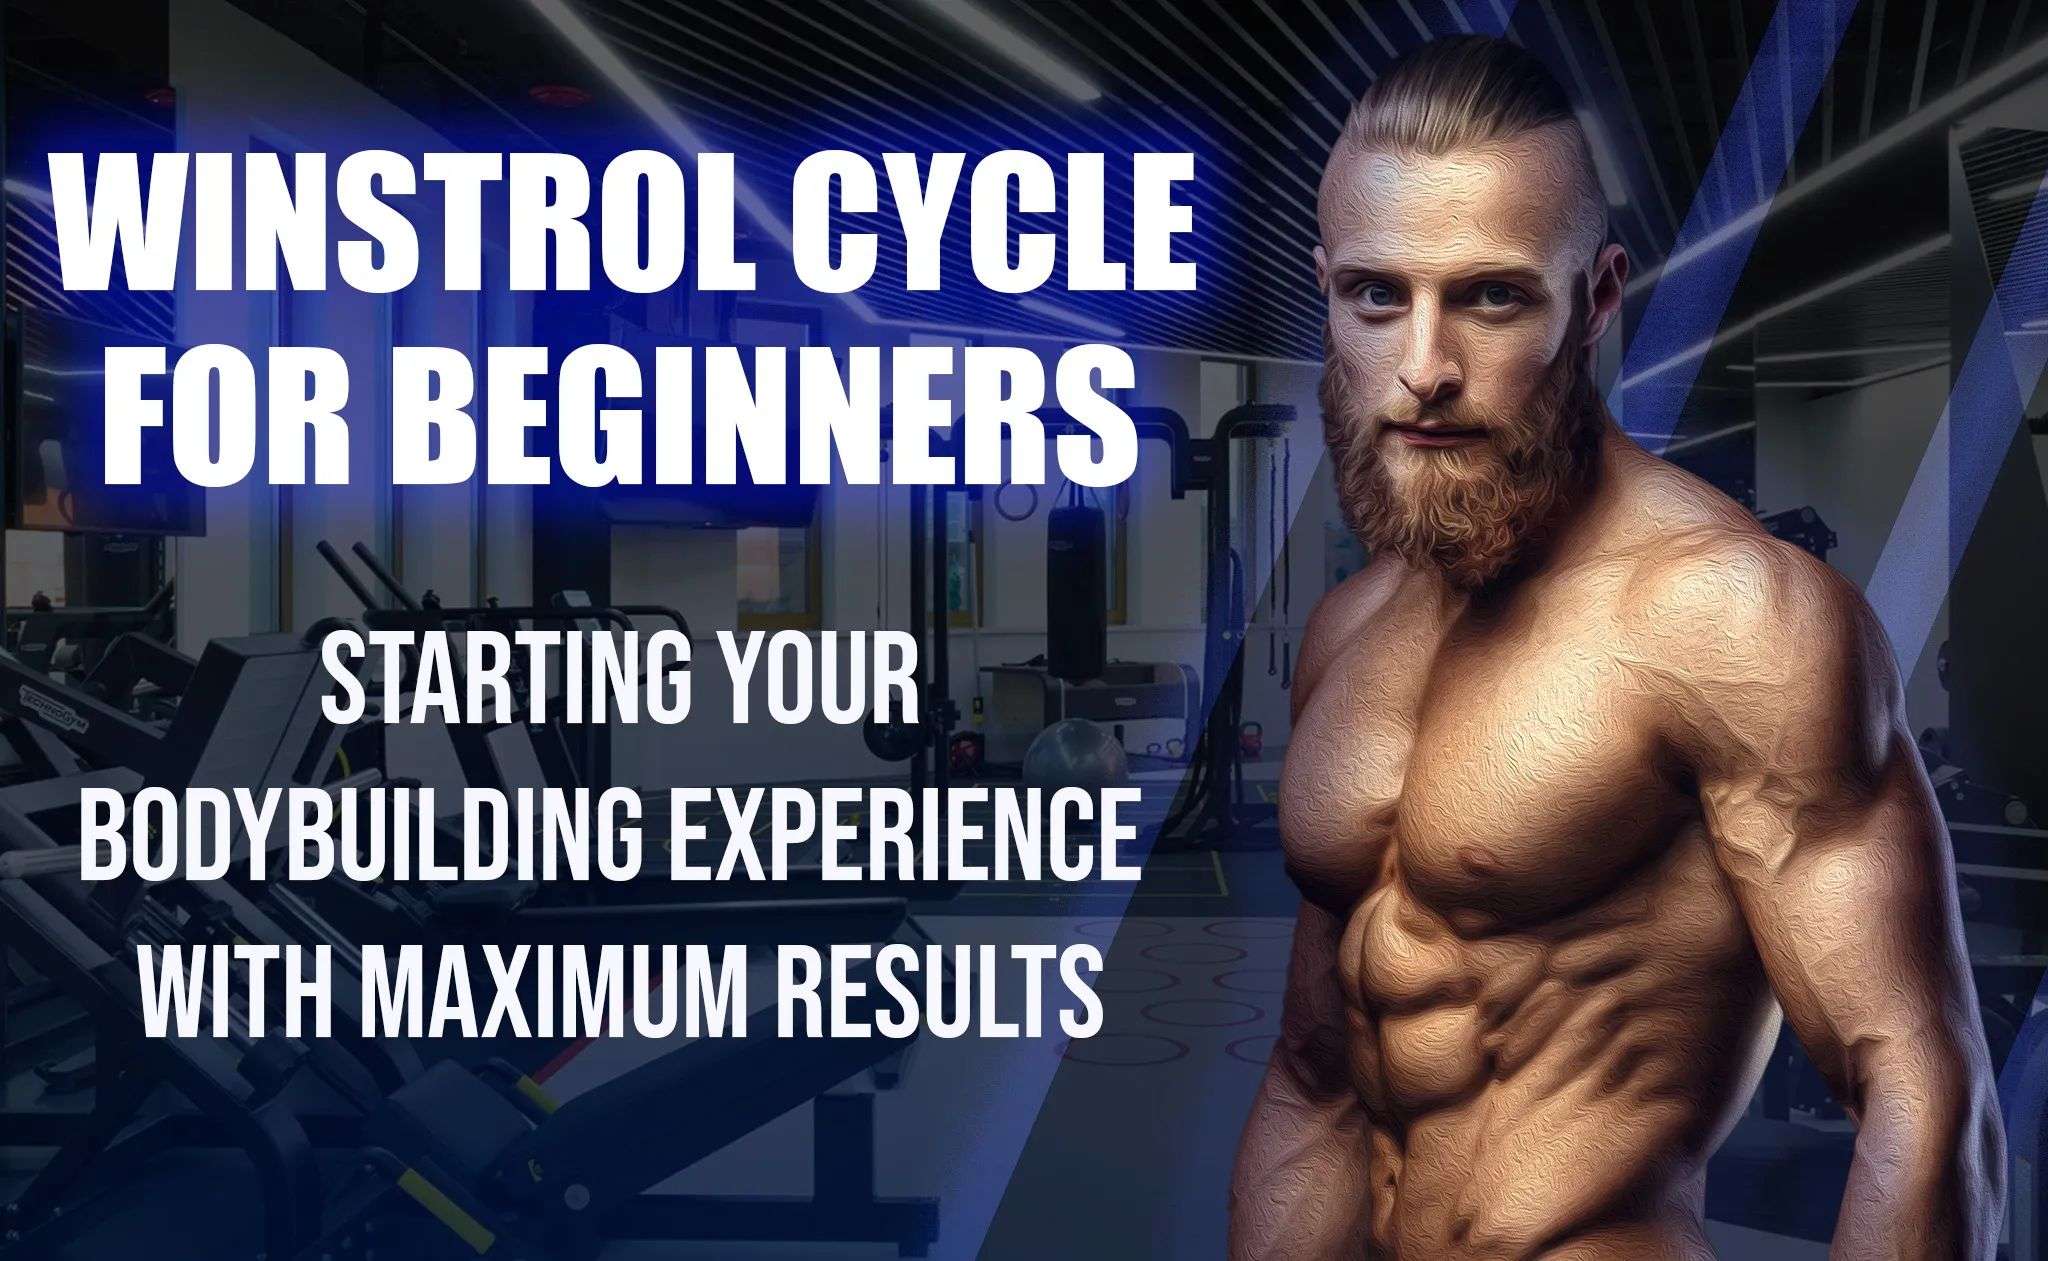 Winstrol Cycle For Beginners Result